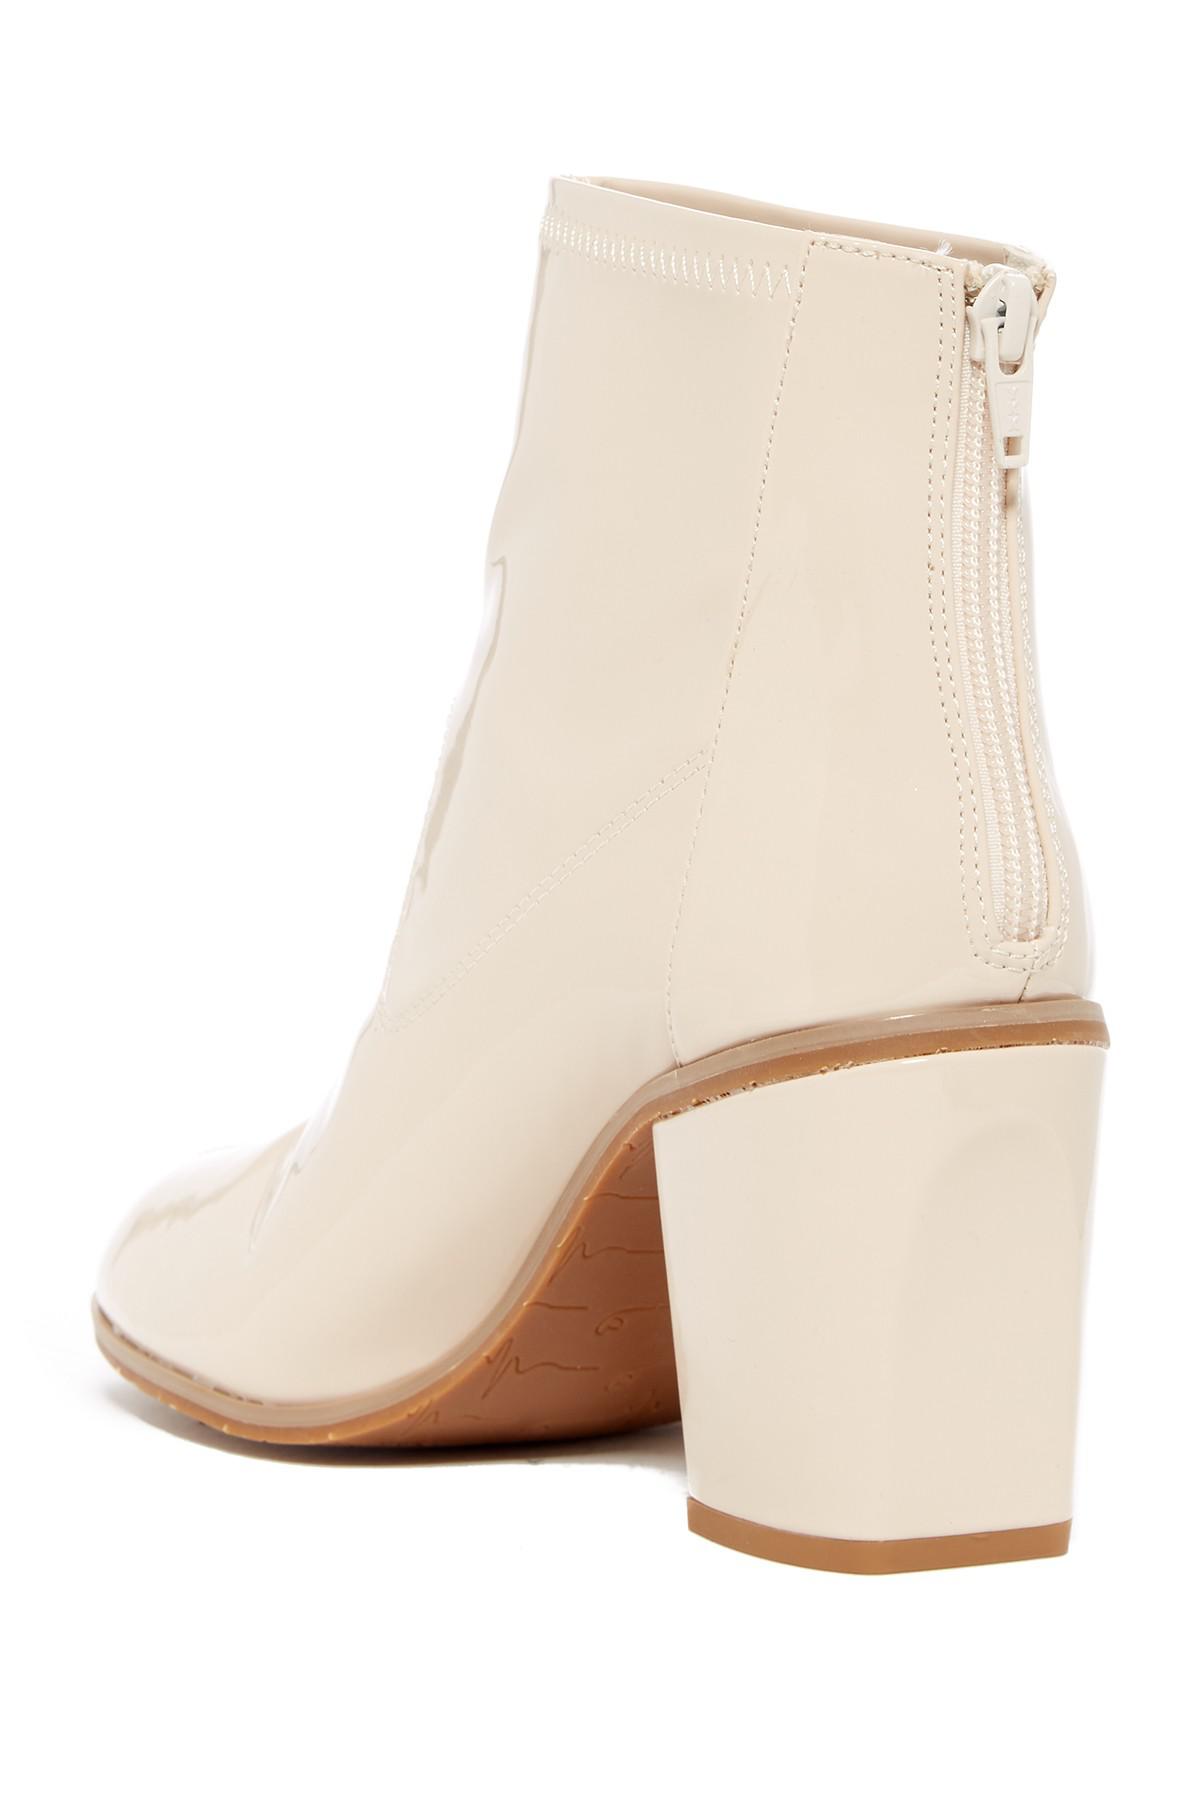 BC Footwear Ringmaster Boot in Nude Patent (Natural) - Lyst